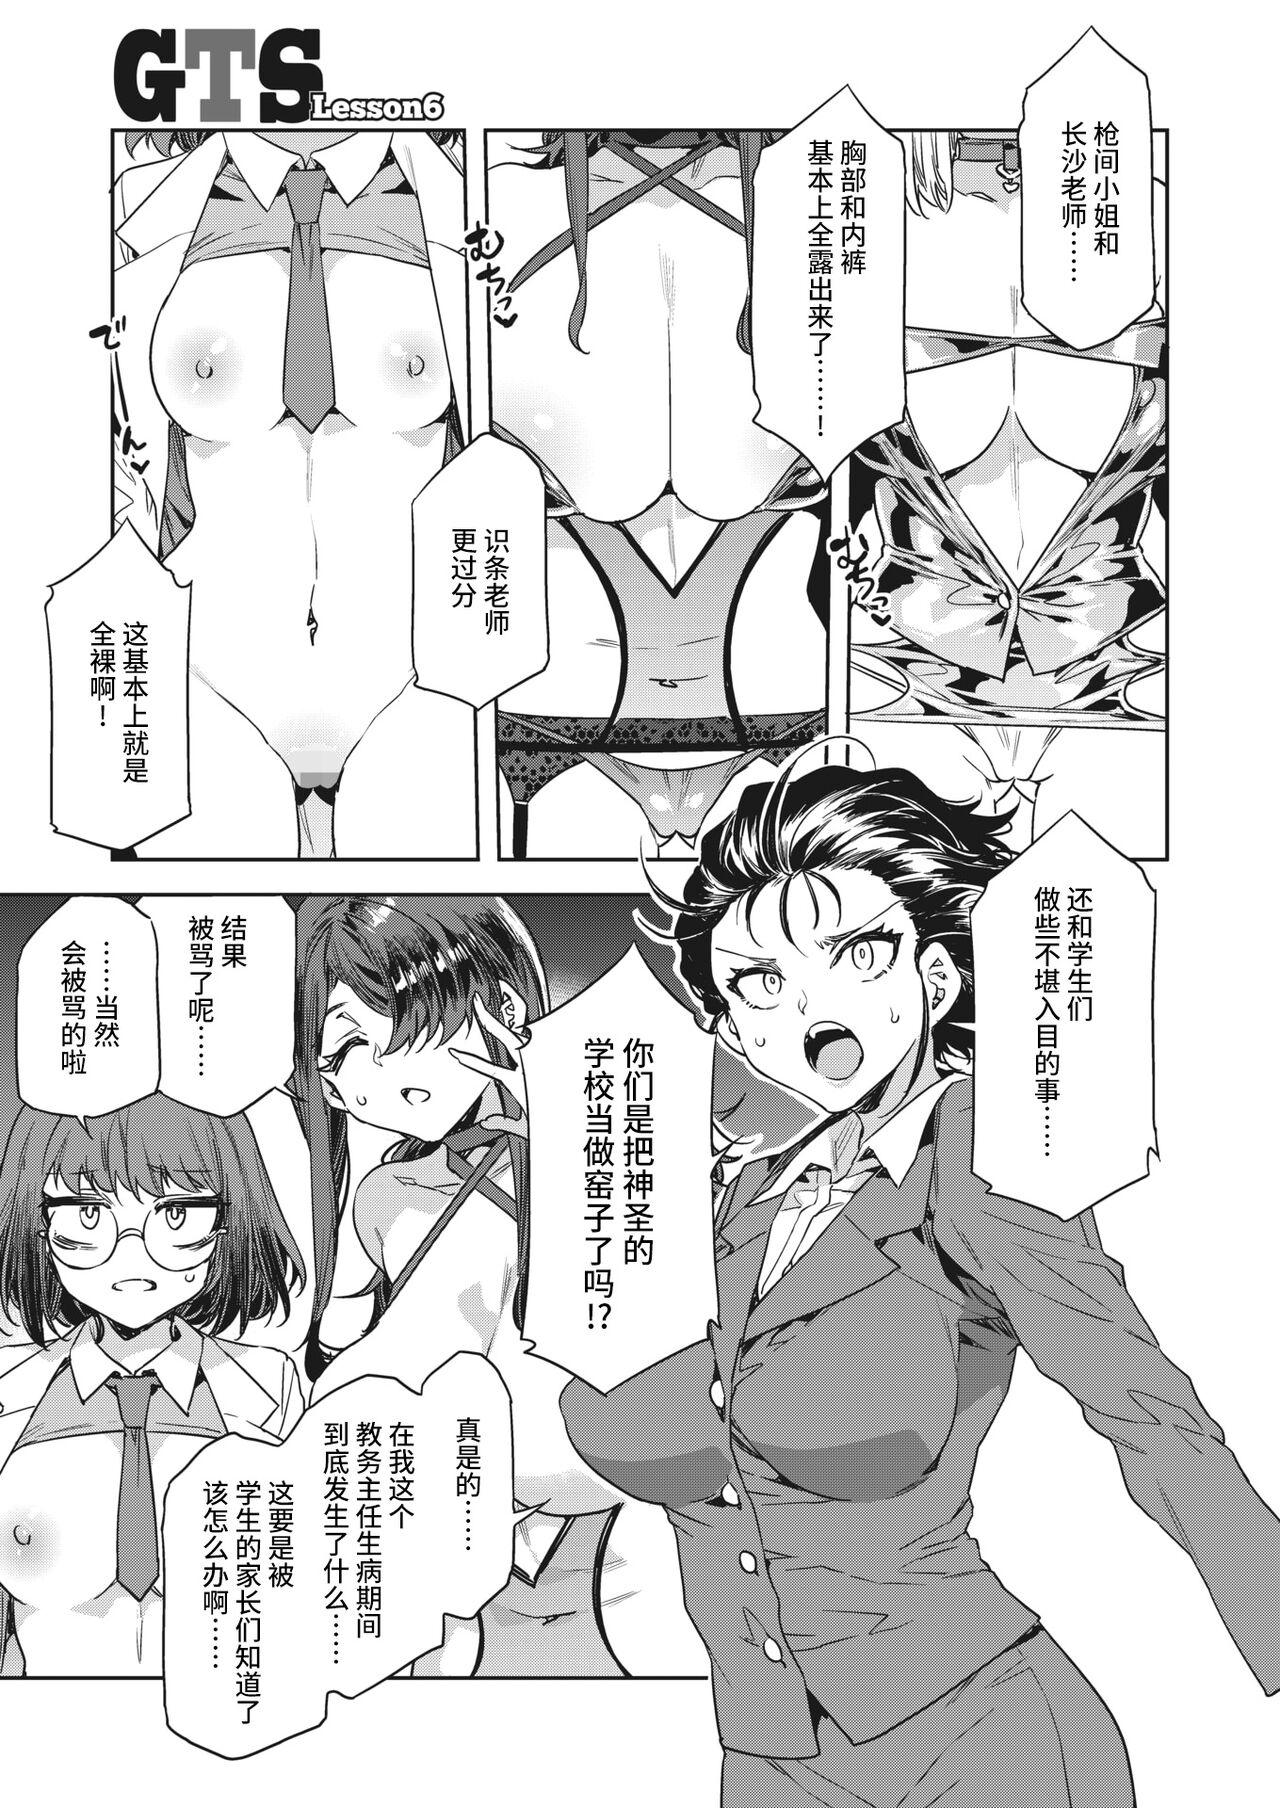 Gaygroup GTS Great Teacher Sayoko Lesson 6 Pale - Page 3